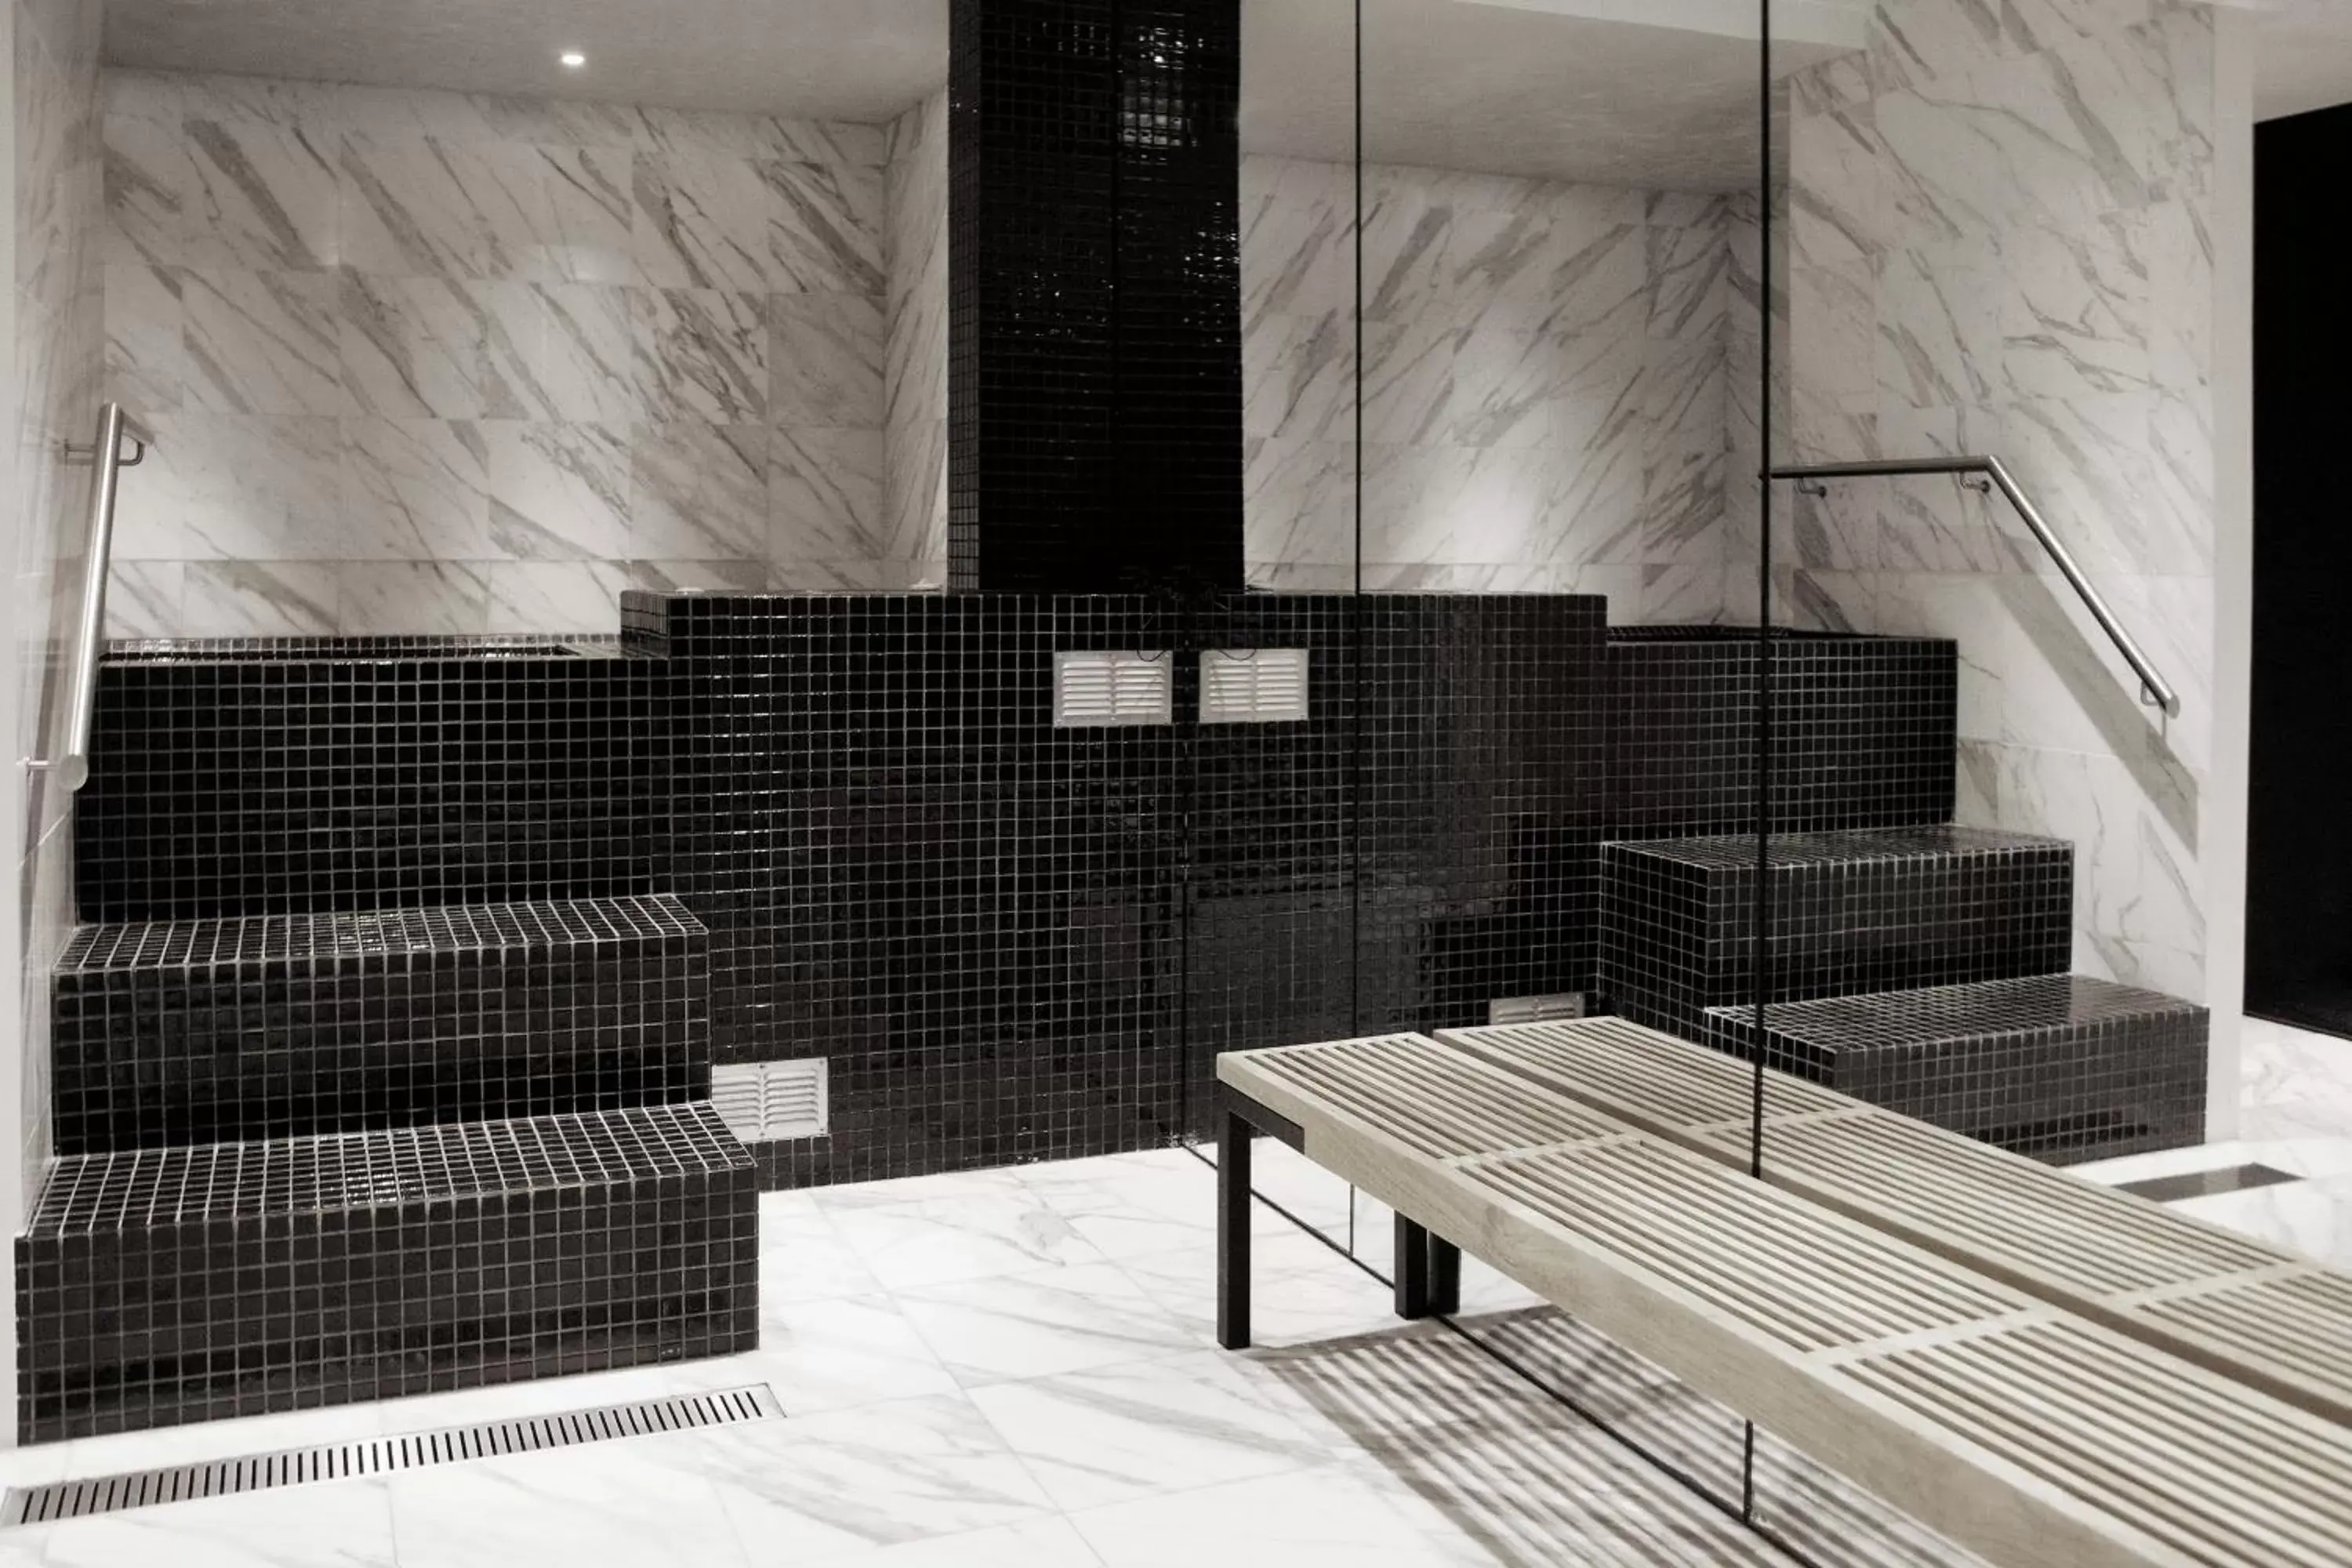 Spa and wellness centre/facilities, Spa/Wellness in 101 Hotel, a Member of Design Hotels